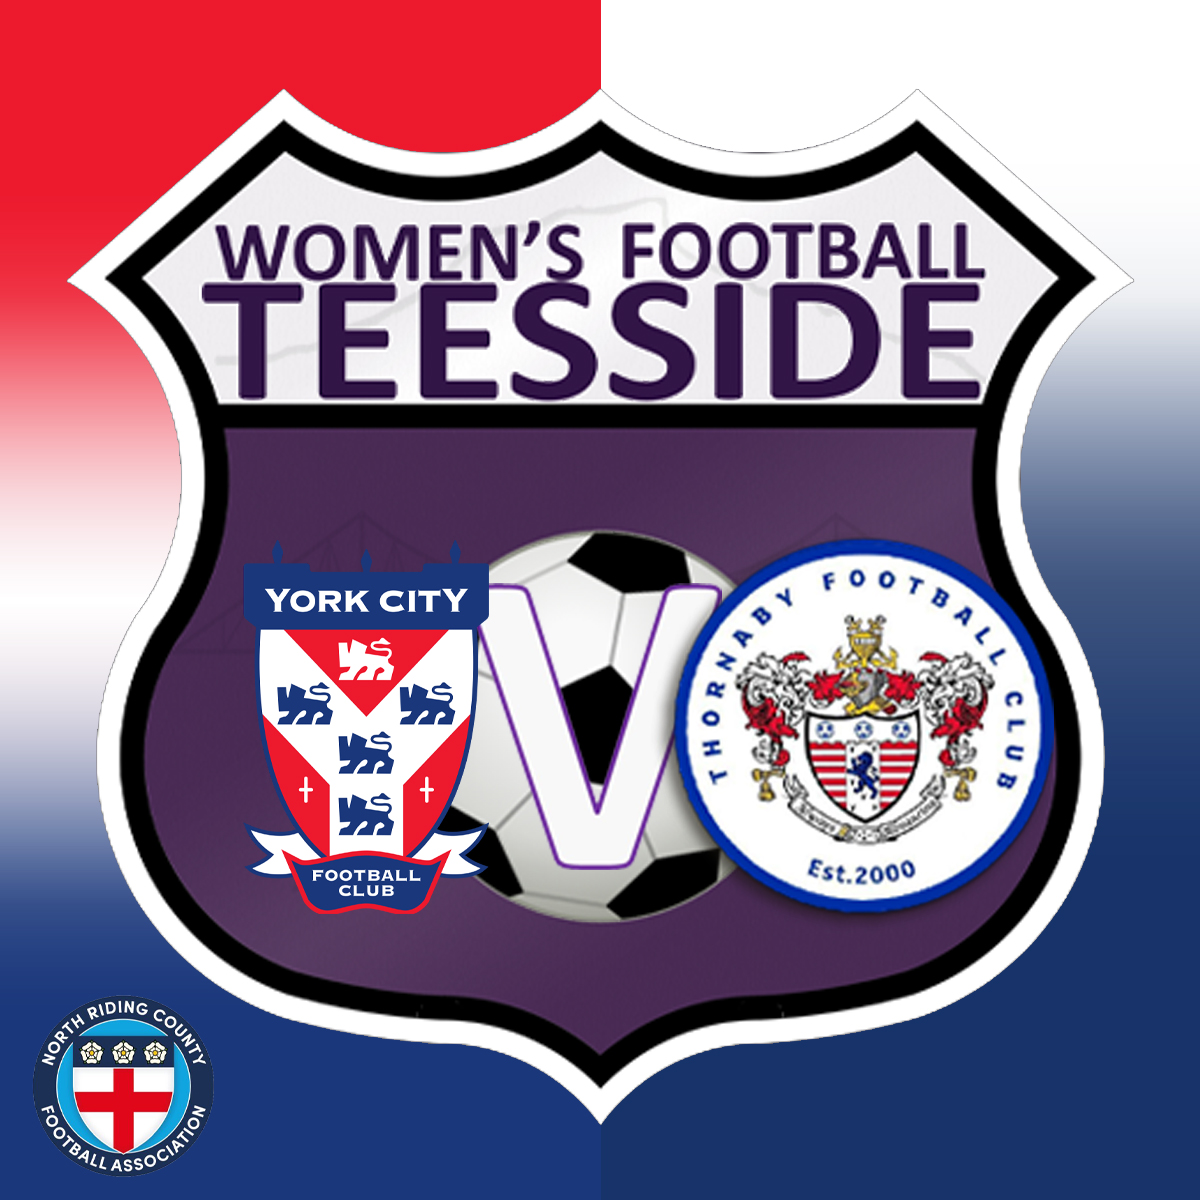 On Tuesday night @ThornabyFCWomen will play @YorkCityLFC in the @NorthRidingFA Cup Final at the Riverside Stadium. It's a first final for Thornaby and they're relishing the opportunity to play at the Riverside. 

#WFT